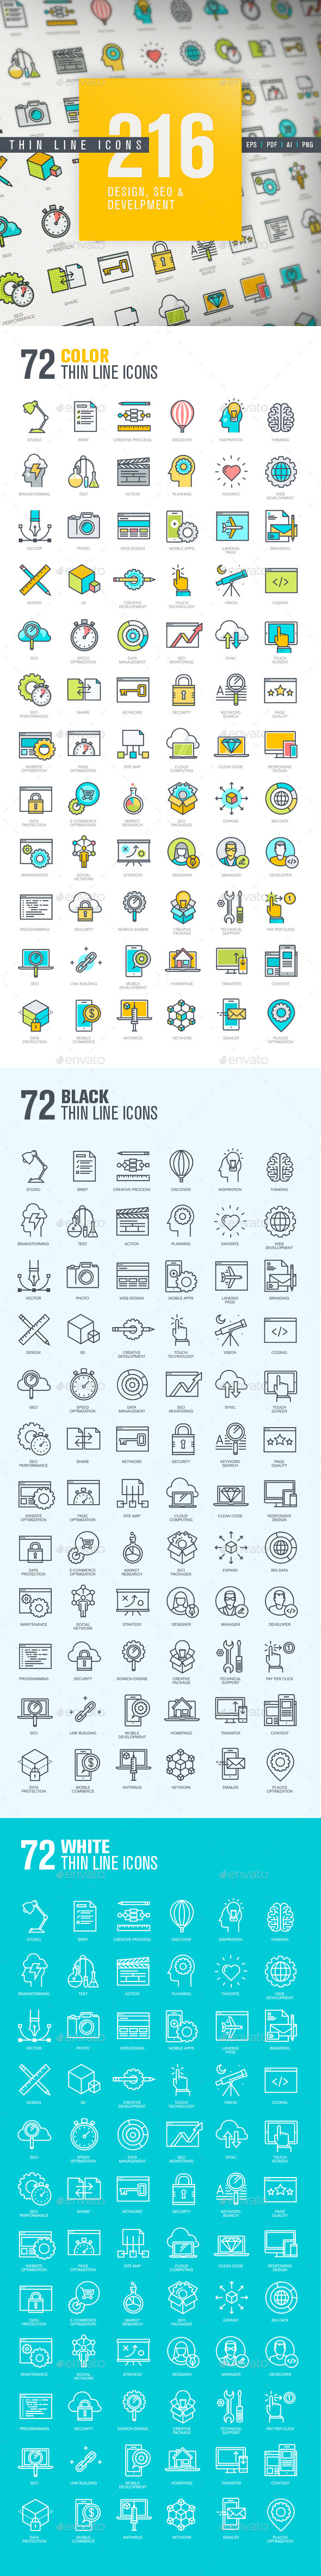 Thin Line Icons for Design, SEO and Development